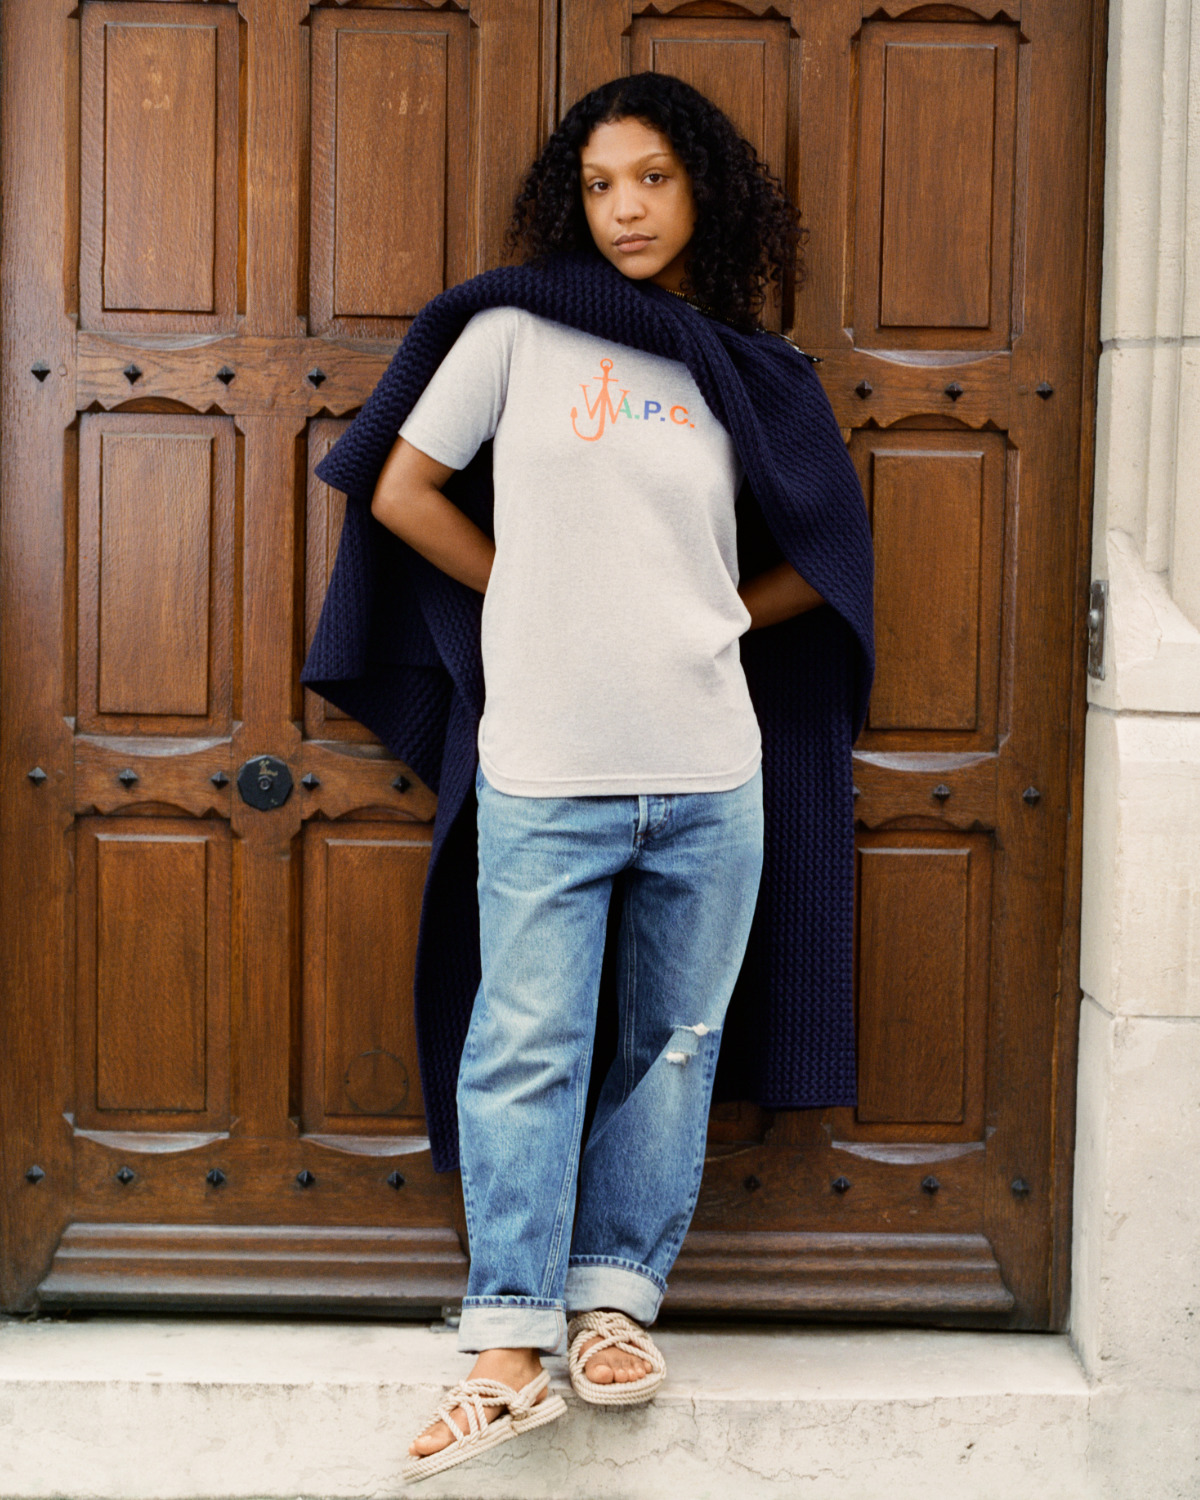 JW Anderson x A.P.C.